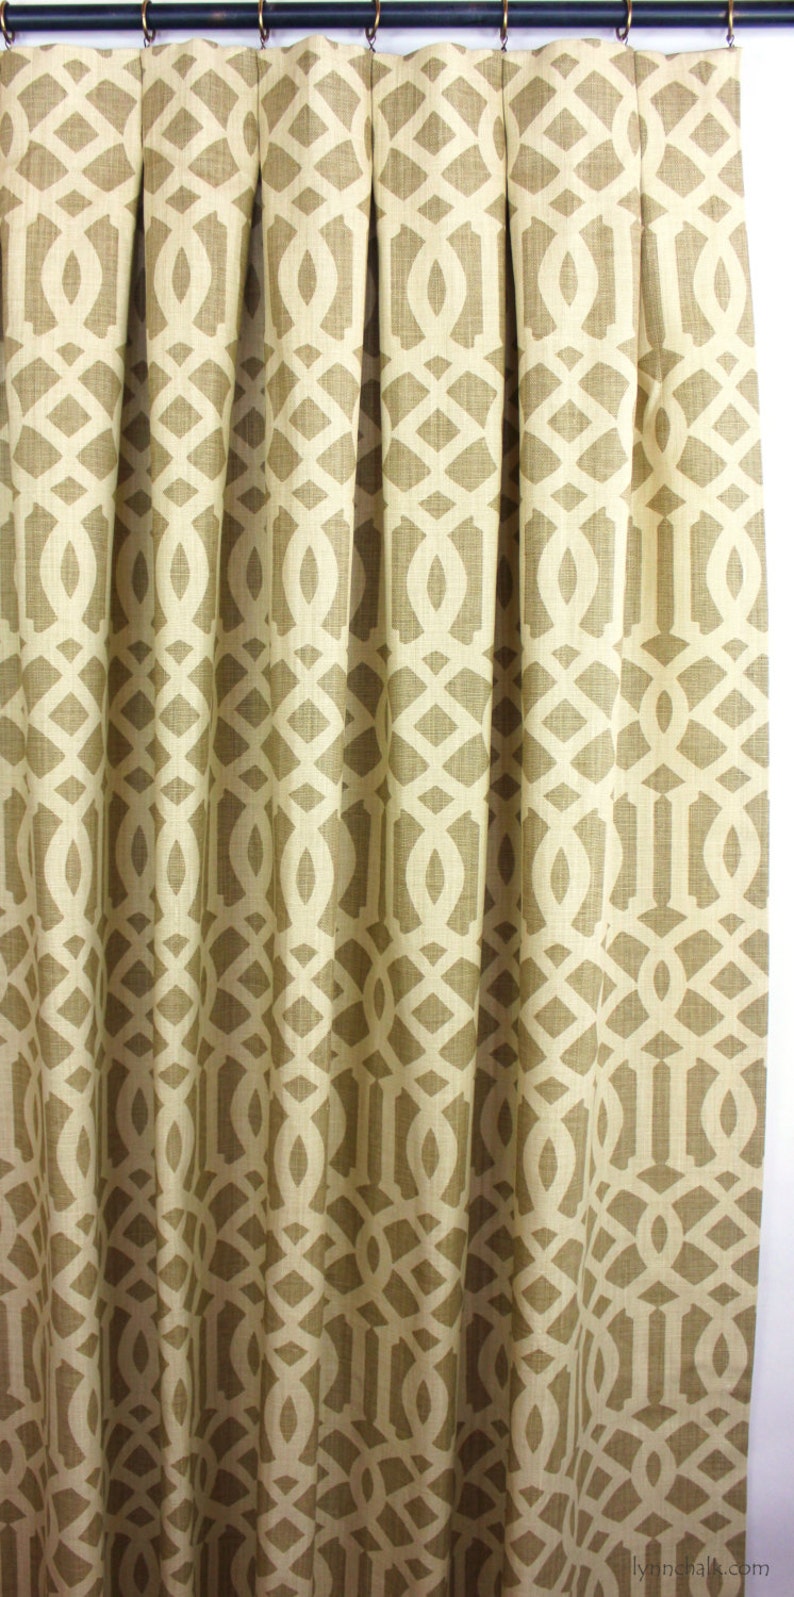 Schumacher Imperial Trellis Pleated Drapes Comes in 11 Colors Shown in Citrine image 3